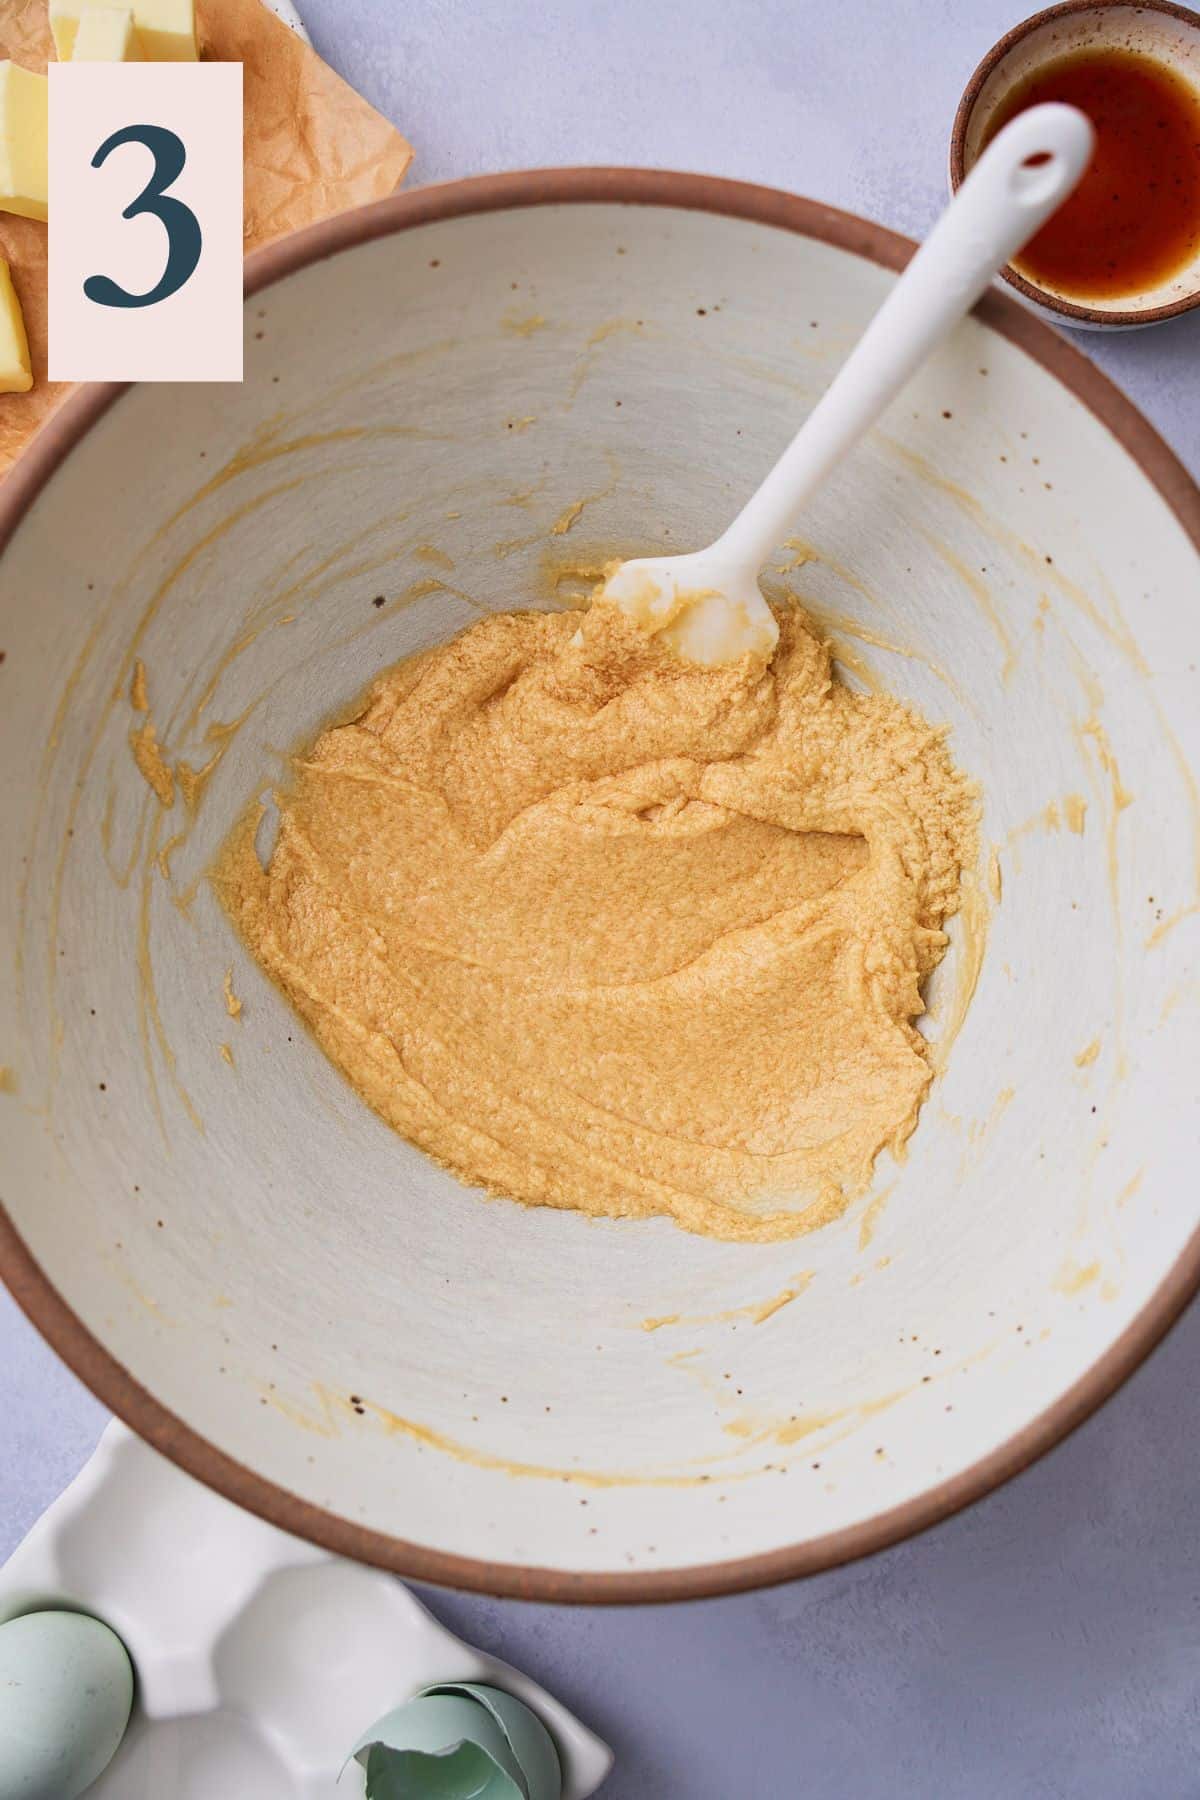 Smooth and creamy mixture of butter, eggs, sugar, and vanilla in a bowl to make cookie dough. 